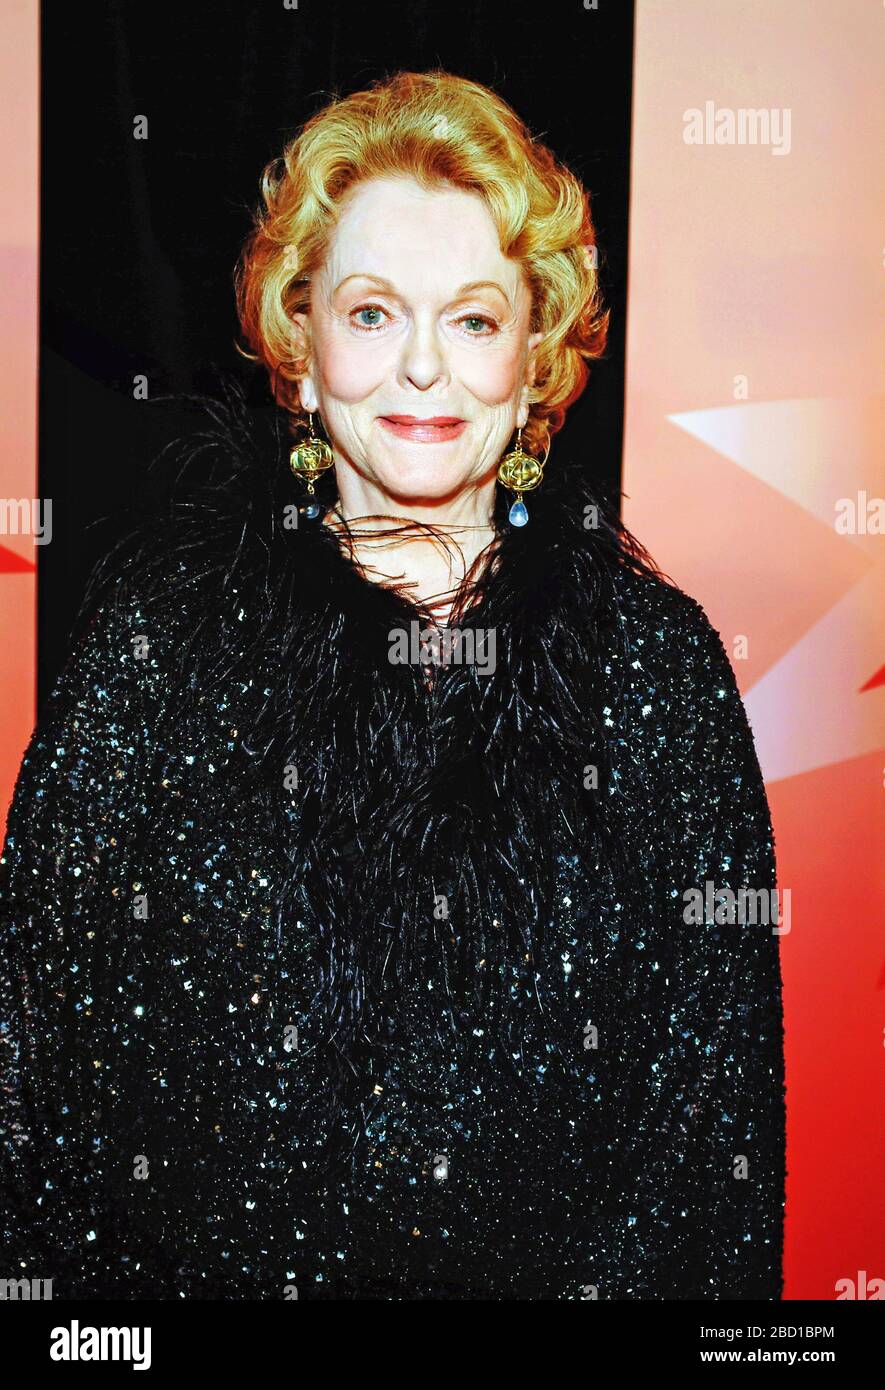 05 April 2020 - Canadian actress and activist Shirley Douglas, mother of actor Kiefer Sutherland and daughter of the late Tommy Douglas (former Saskatchewan premier and the founder of Canada's Medicare system) has died at age 86. File Photo: 2004 Canada's Walk of Fame, Roy Thomson Hall, Toronto, Ontario, Canada. Photo Credit: Brent Perniac/AdMedia /MediaPunch Stock Photo